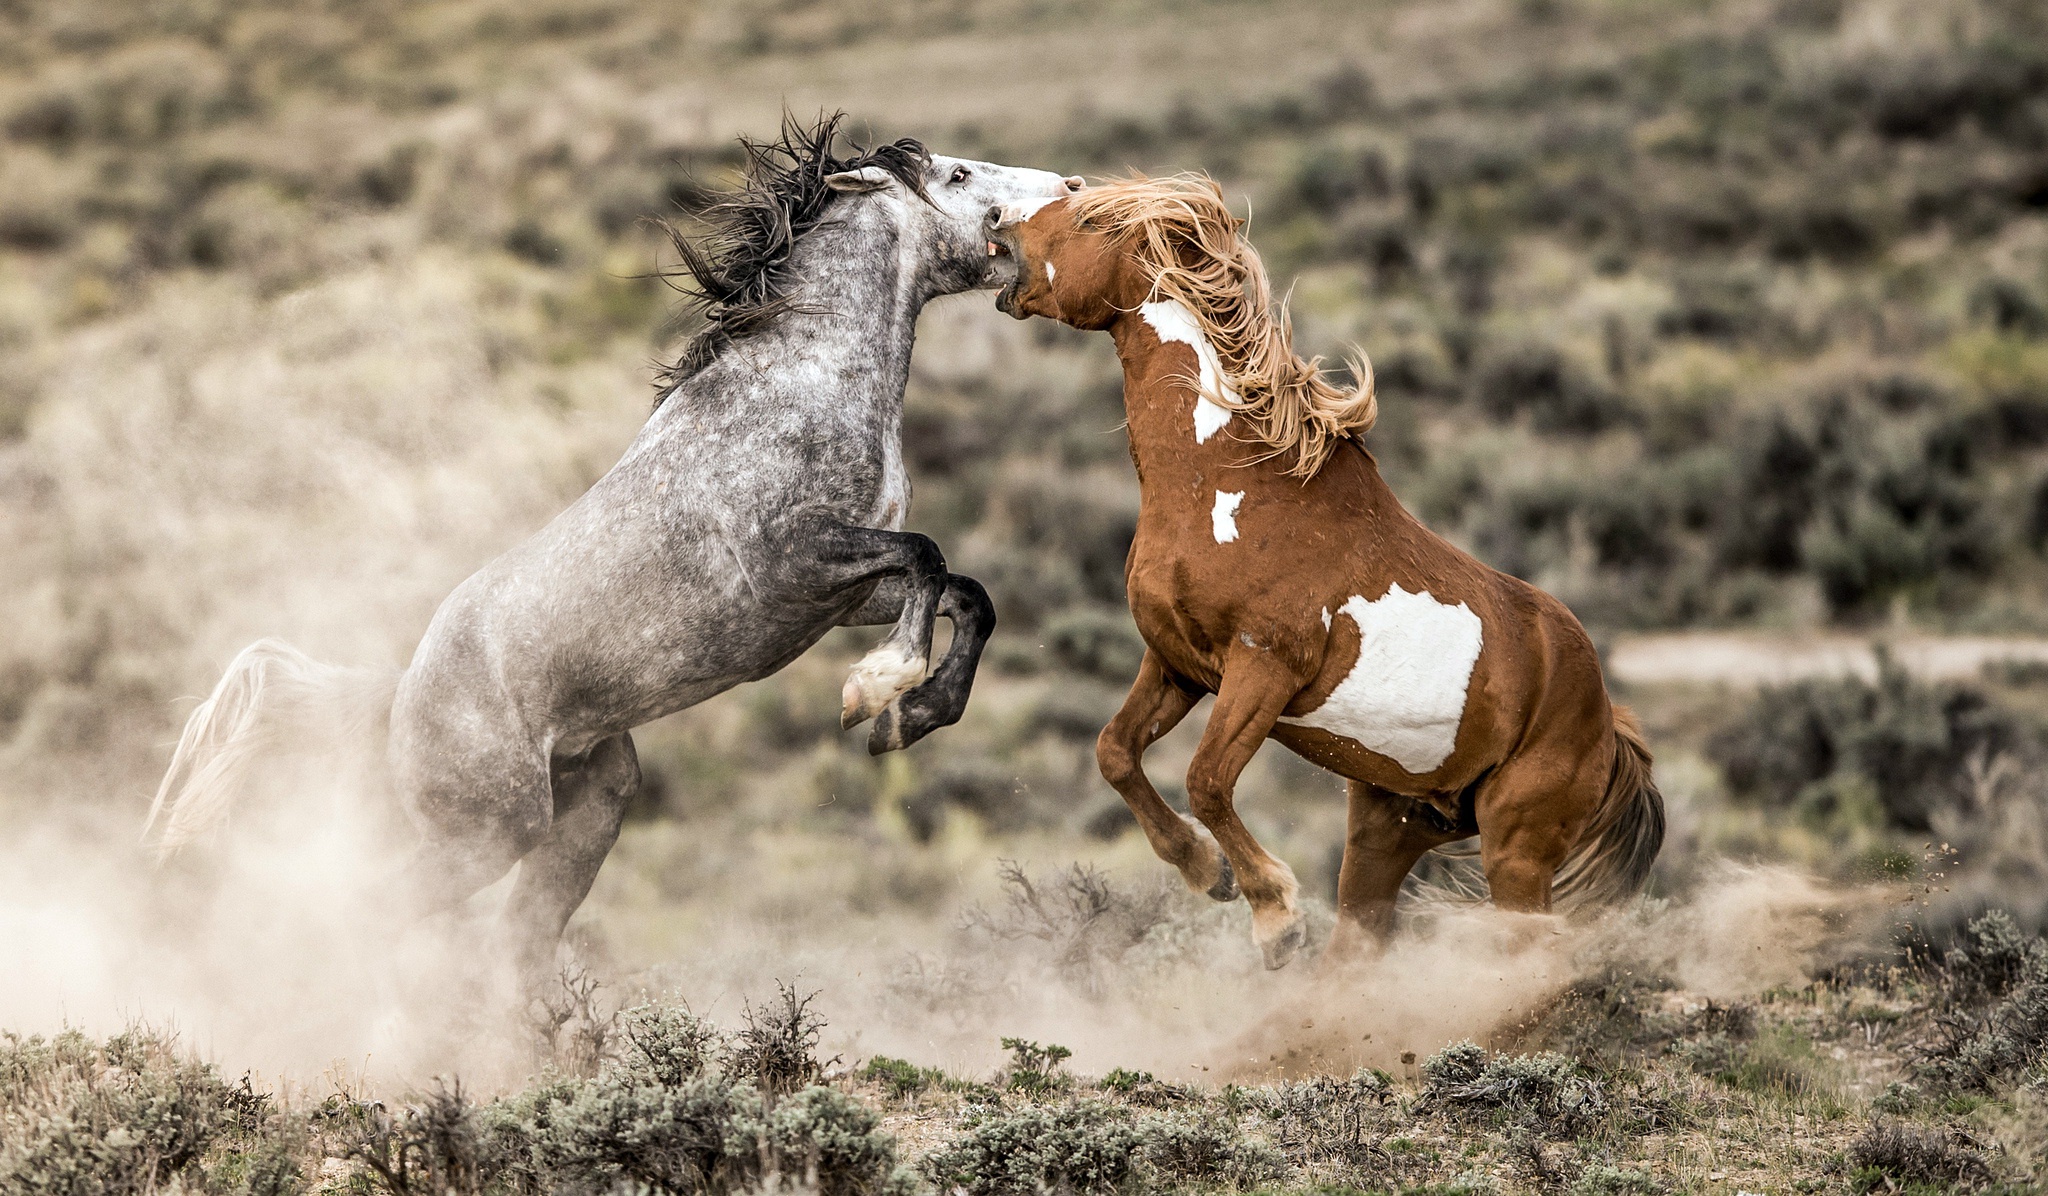 General 2048x1196 horse nature fighting